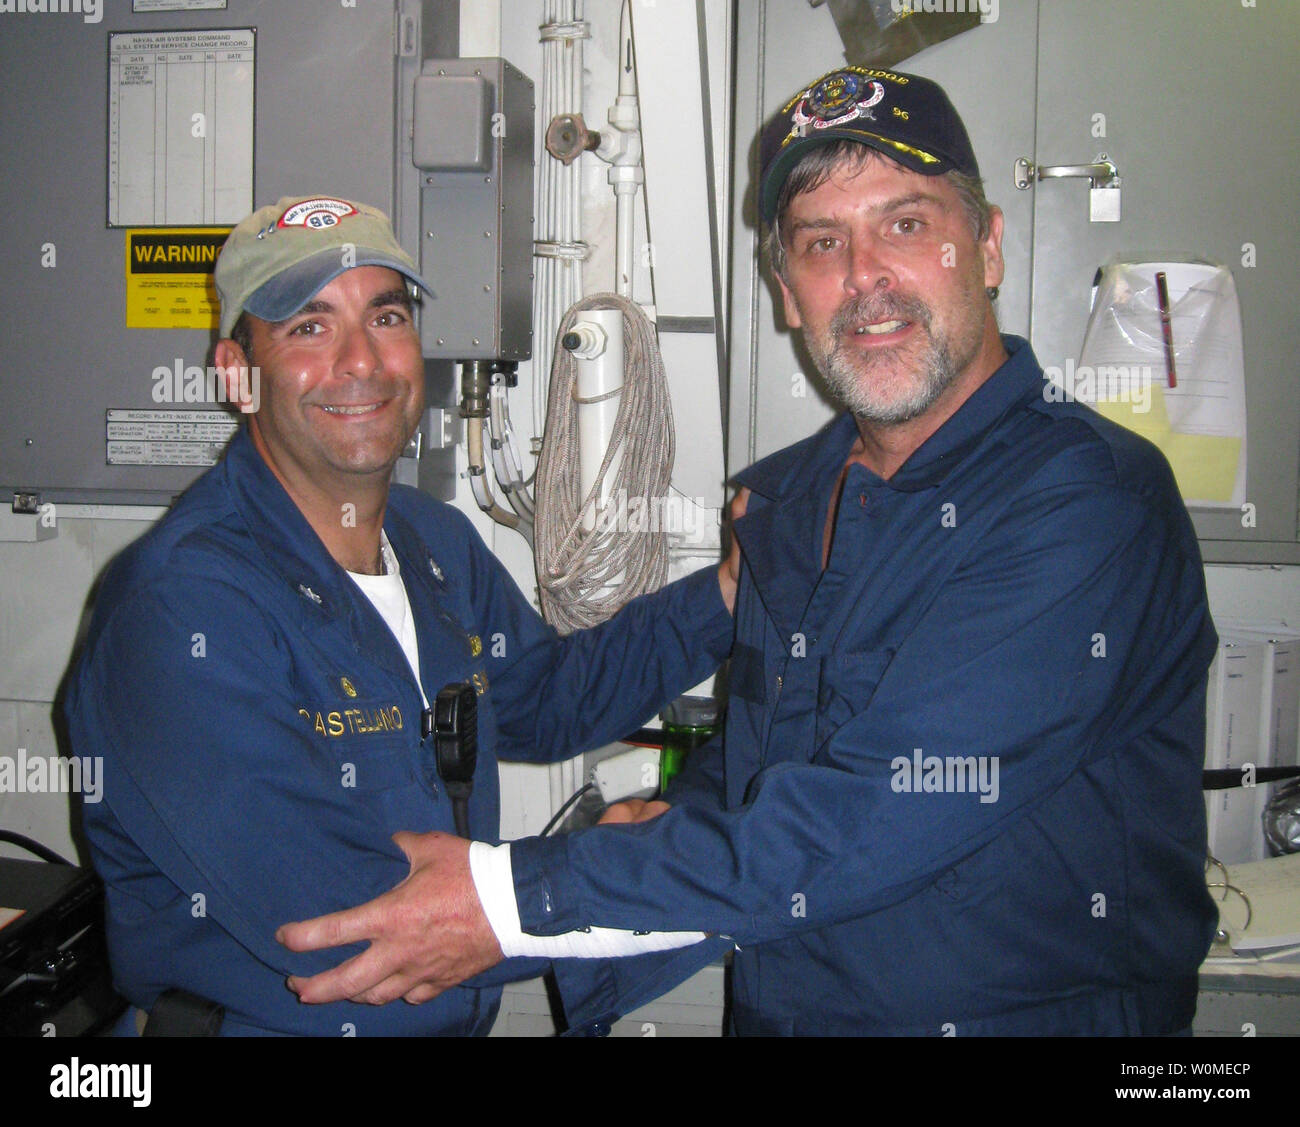 Maersk-Alabama Capt. Richard Phillips, right, stands alongside Cmdr. Frank Castellano, commanding officer of USS Bainbridge after Phillips was rescued by U.S Naval forces off the coast of Somalia on April 12, 2009. Philips was held hostage for four days by pirates. US Navy SEALs shot dead three pirates when they felt he was in imminent danger as the pirates pointed an AK-47 rifle at him.    (UPI Photo/U.S. Navy Photo) Stock Photo